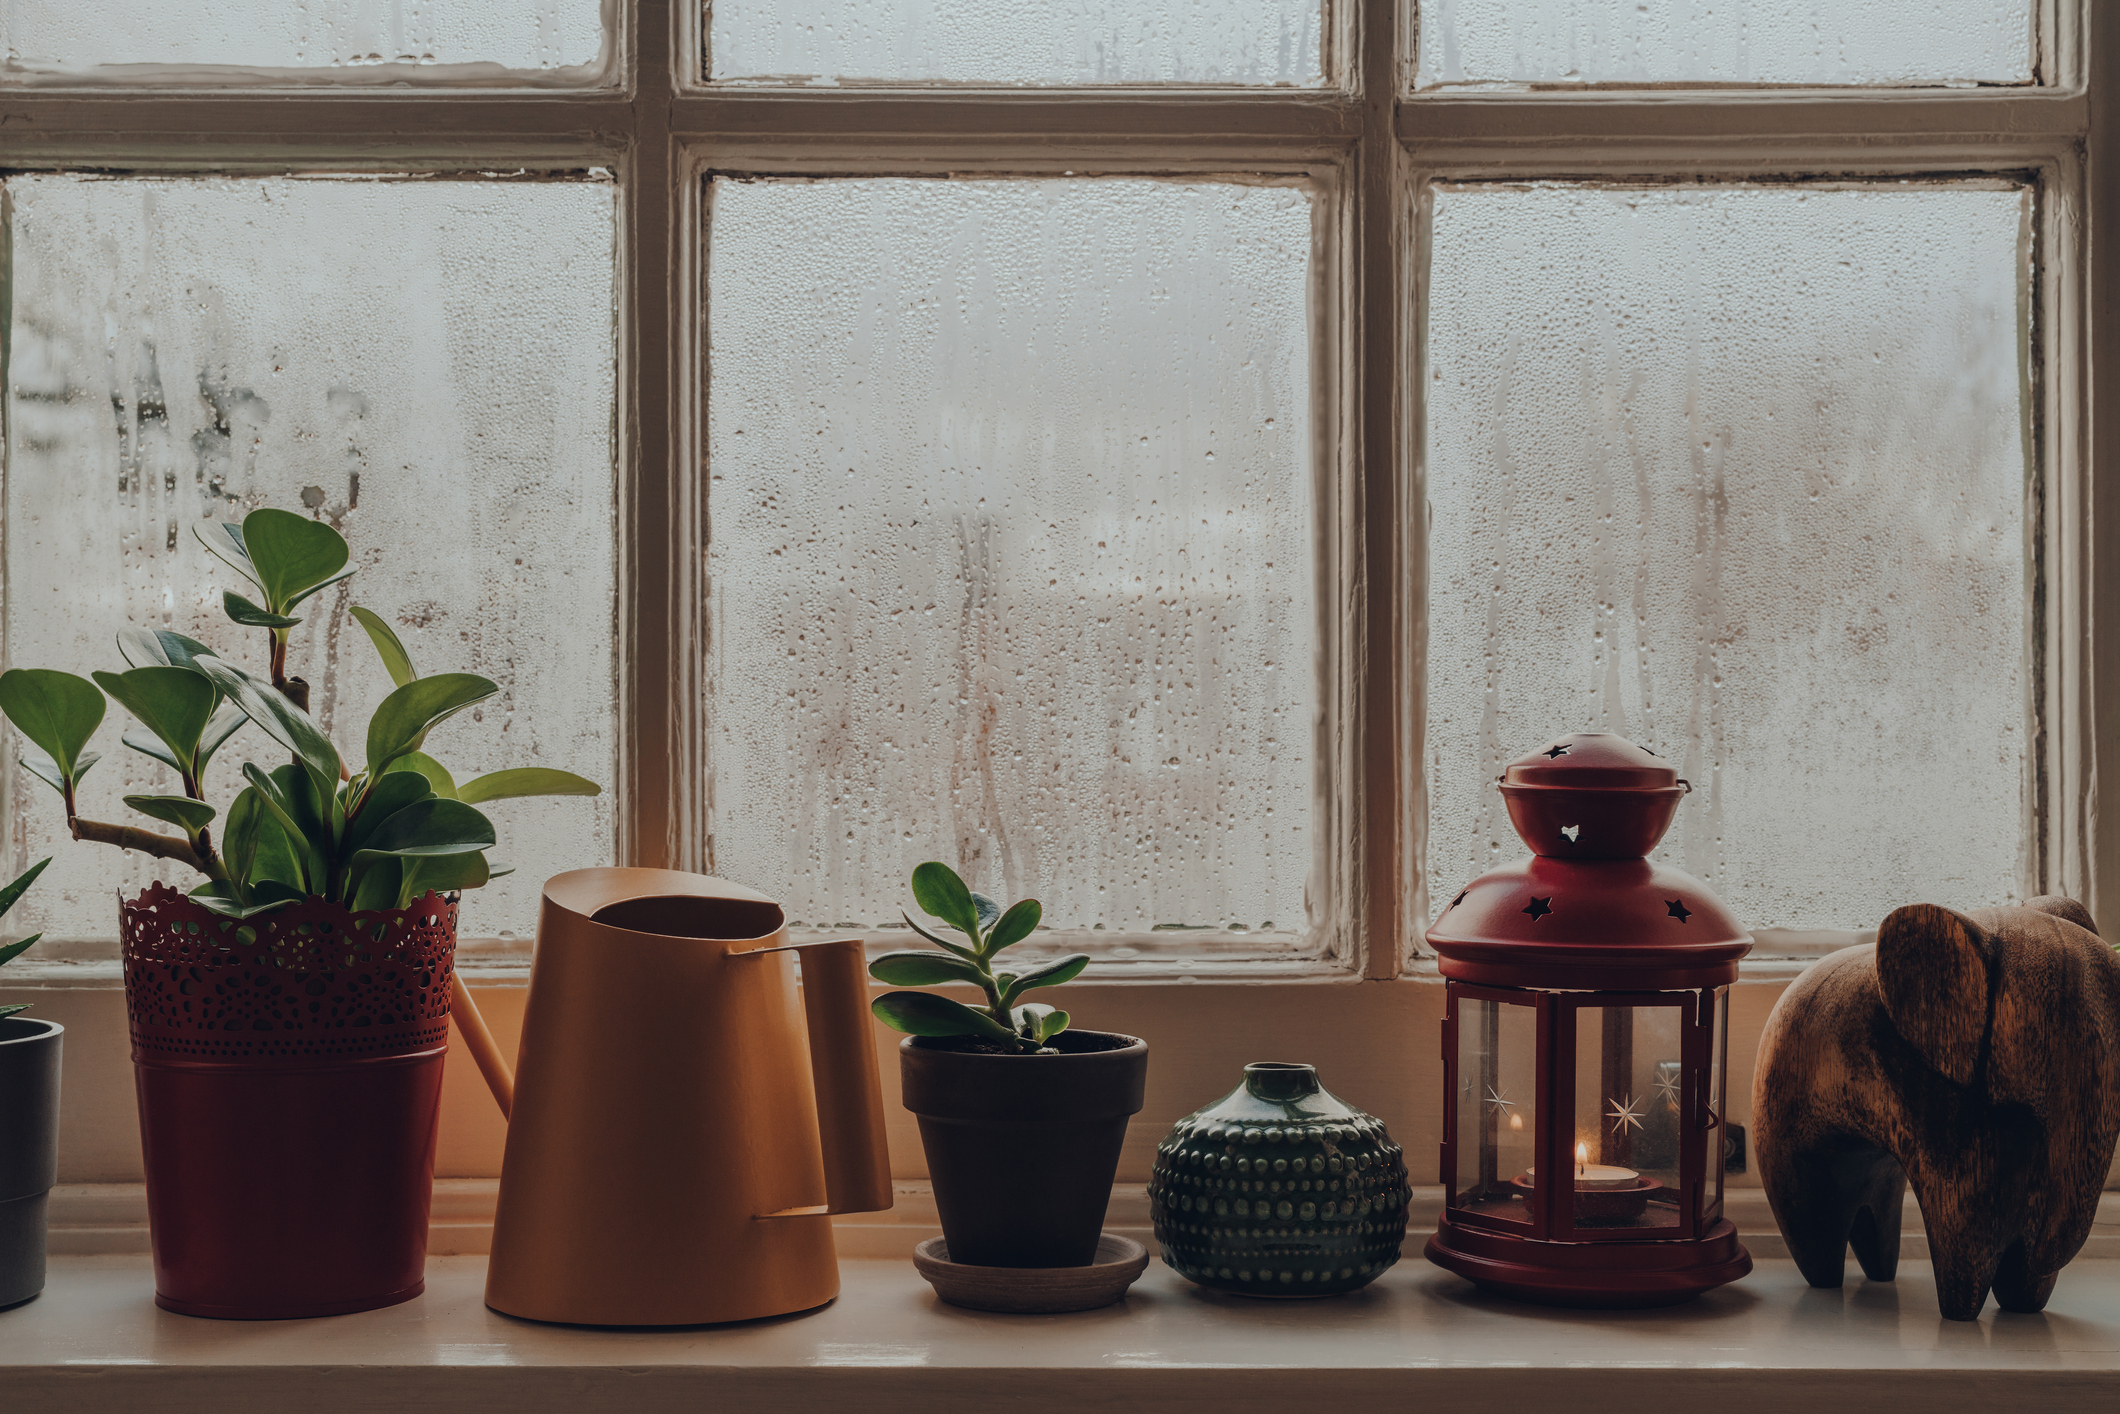 Is Condensation on Windows Bad, Causes & How to Stop It - Ecohome